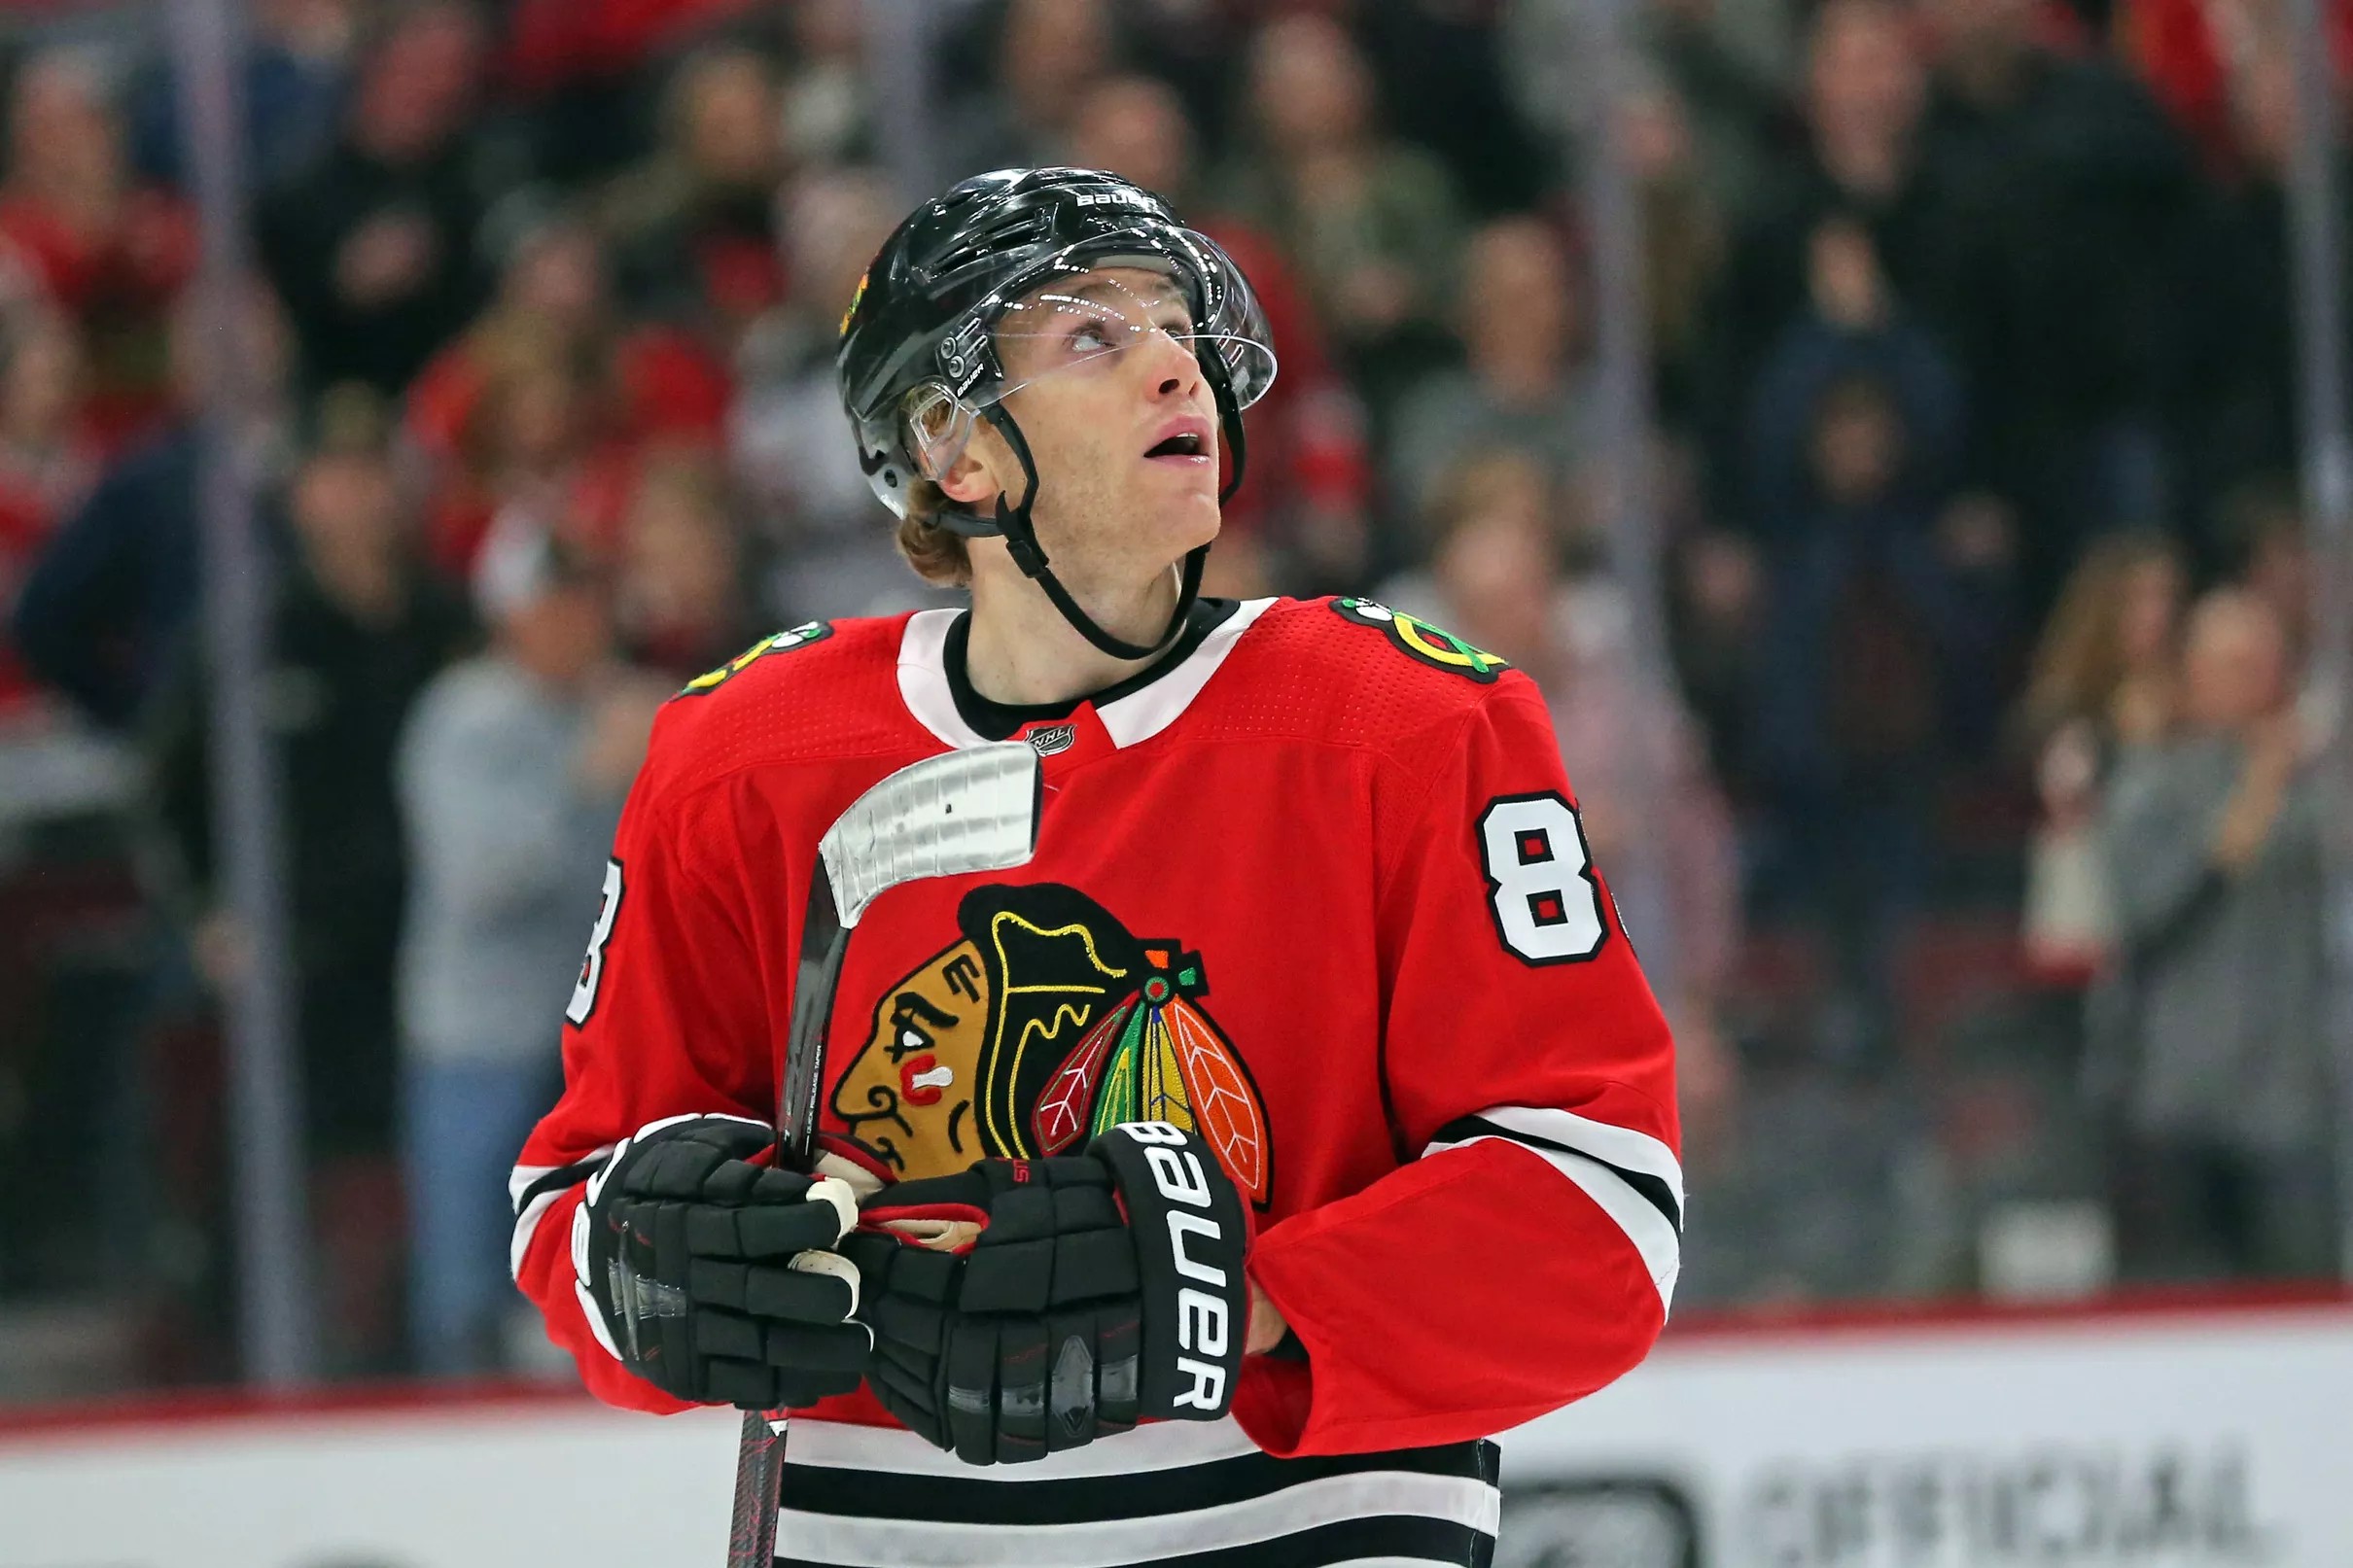 Blackhawks’ Patrick Kane is No. 8 overall rated player in ‘NHL 19’